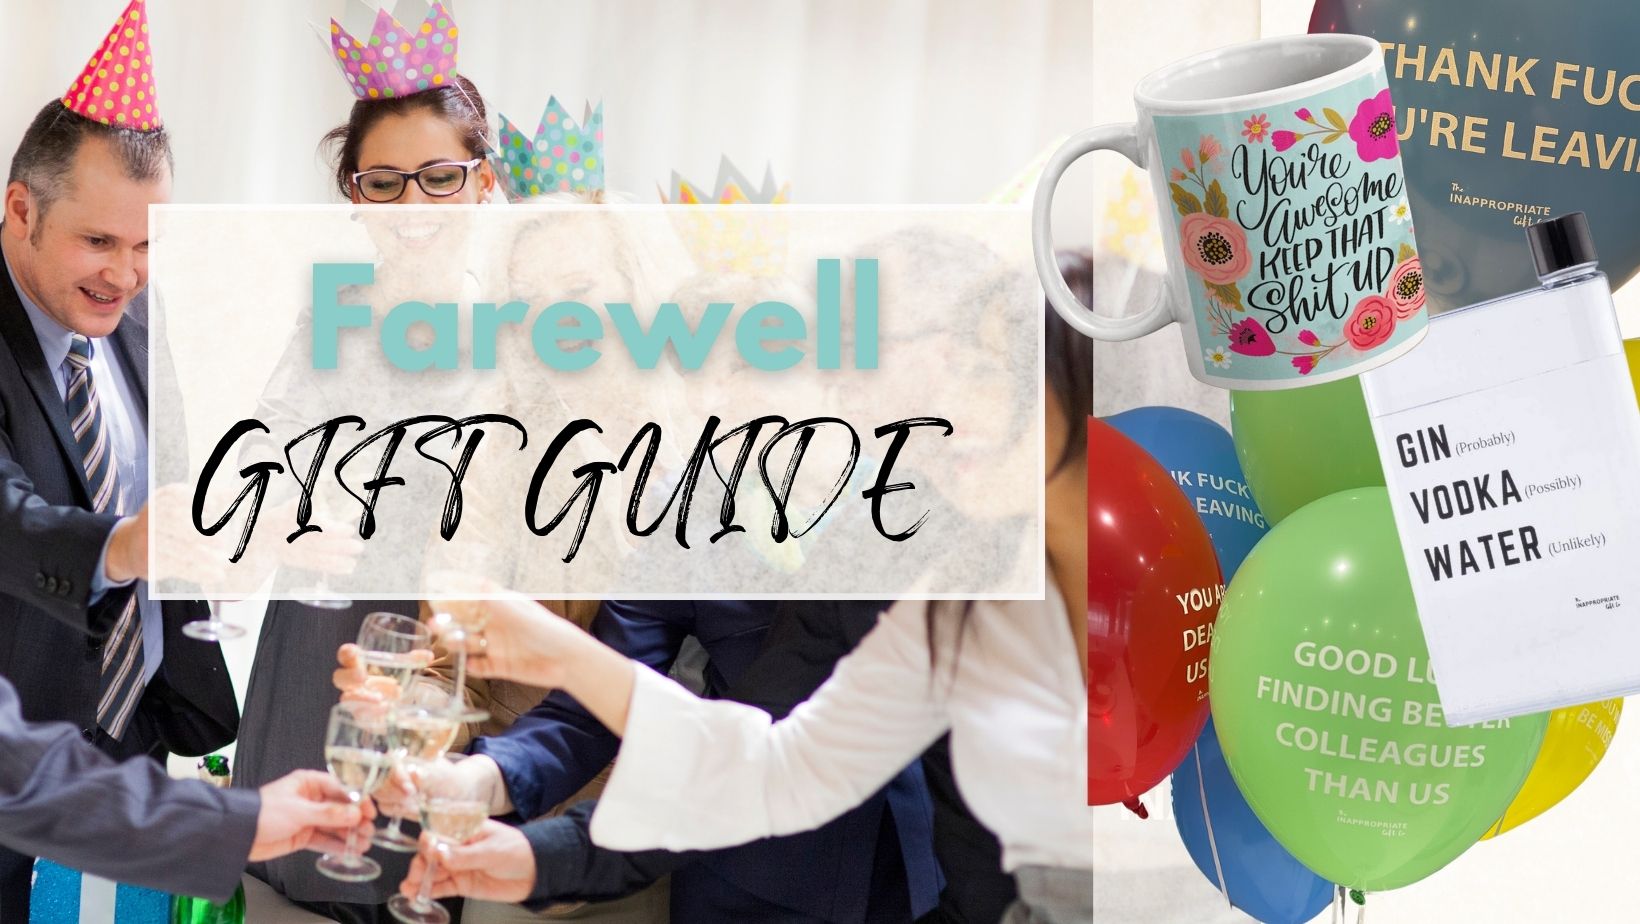 10 Memorable Farewell Gift Ideas to send your Coworker off with a laugh!